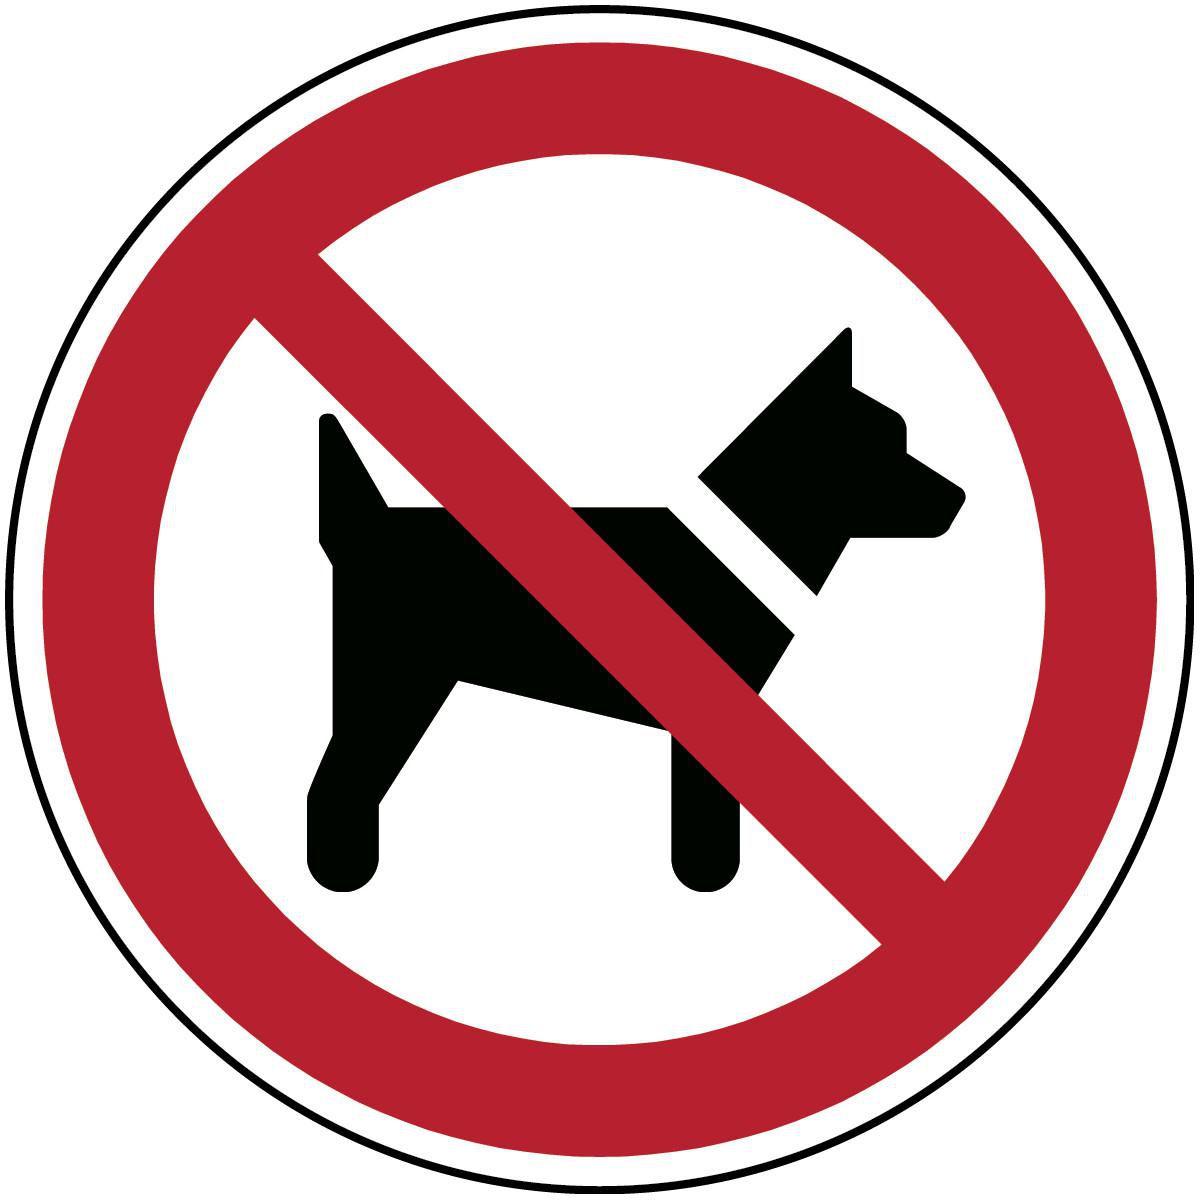 Brady PIC P021-DIA 400-PP-CRD1 W128413197 ISO Safety Sign - No dogs 